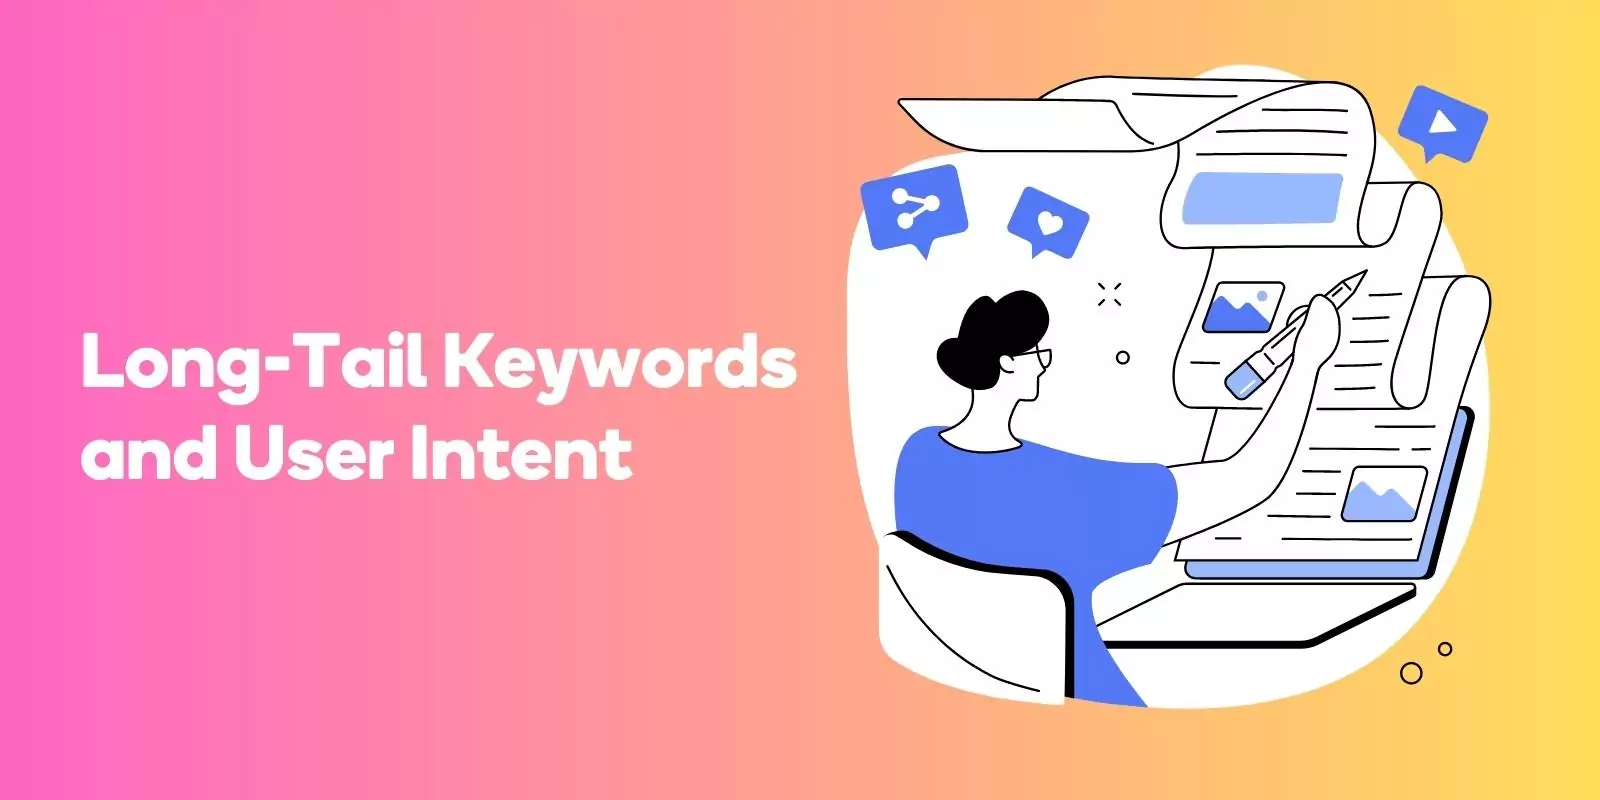 Long-Tail Keywords and User Intent